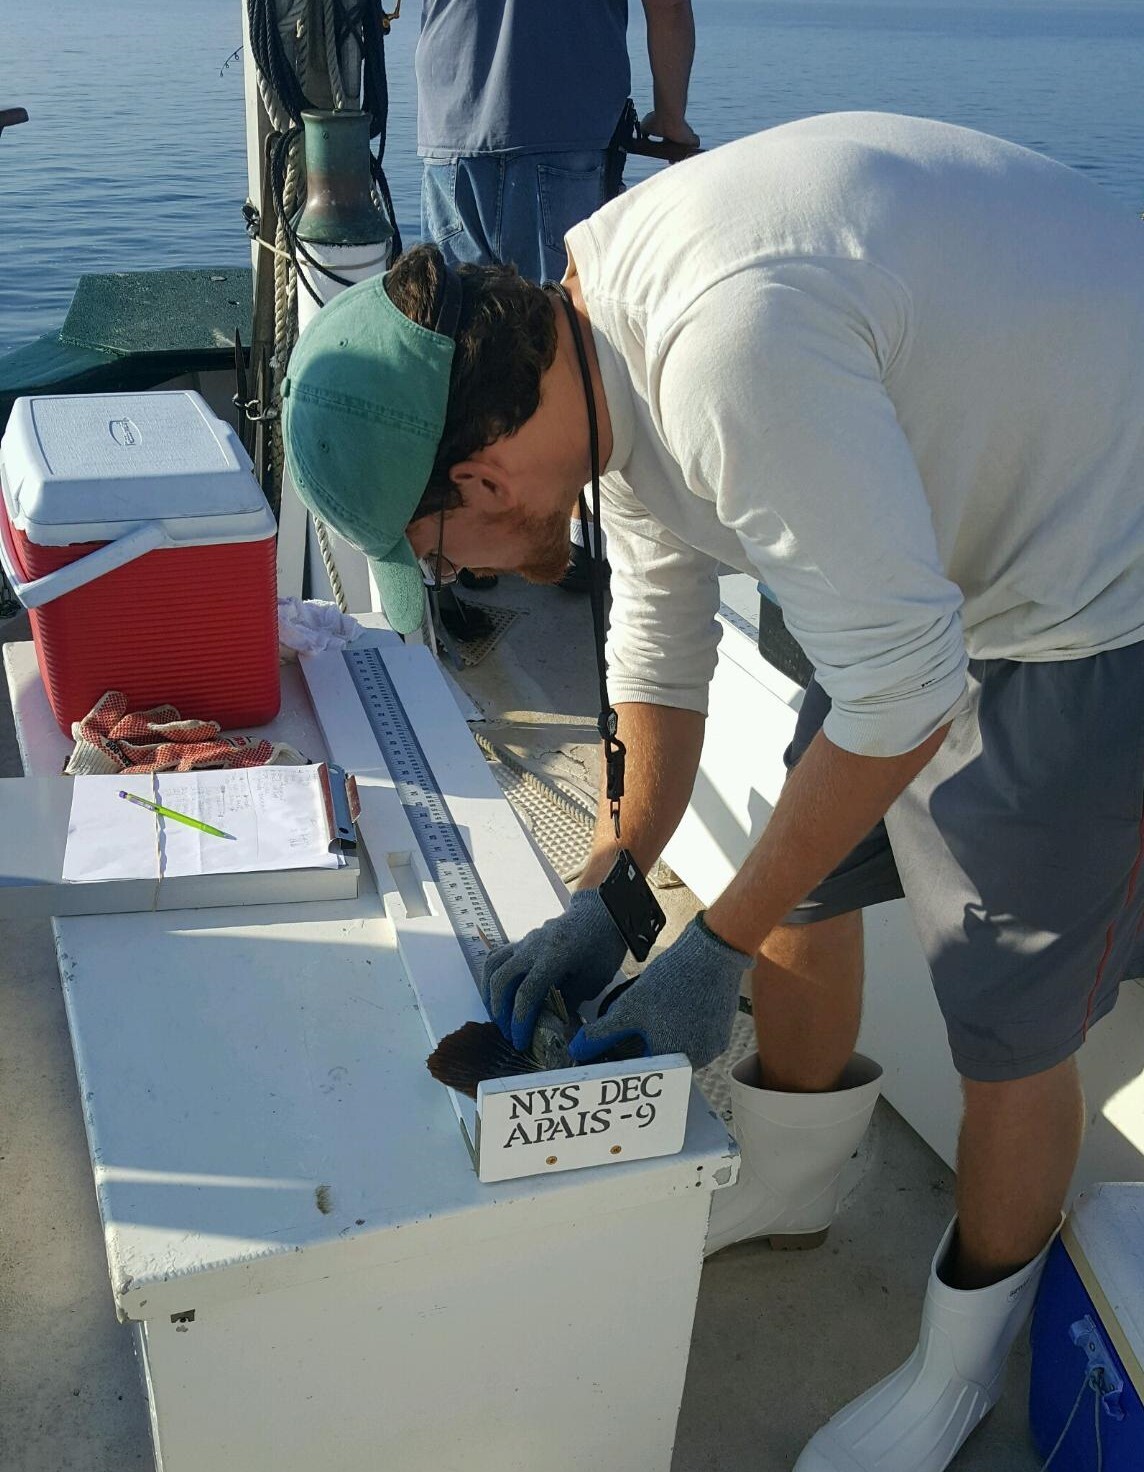 DEC staff measuring fish on a recreational fishing boat